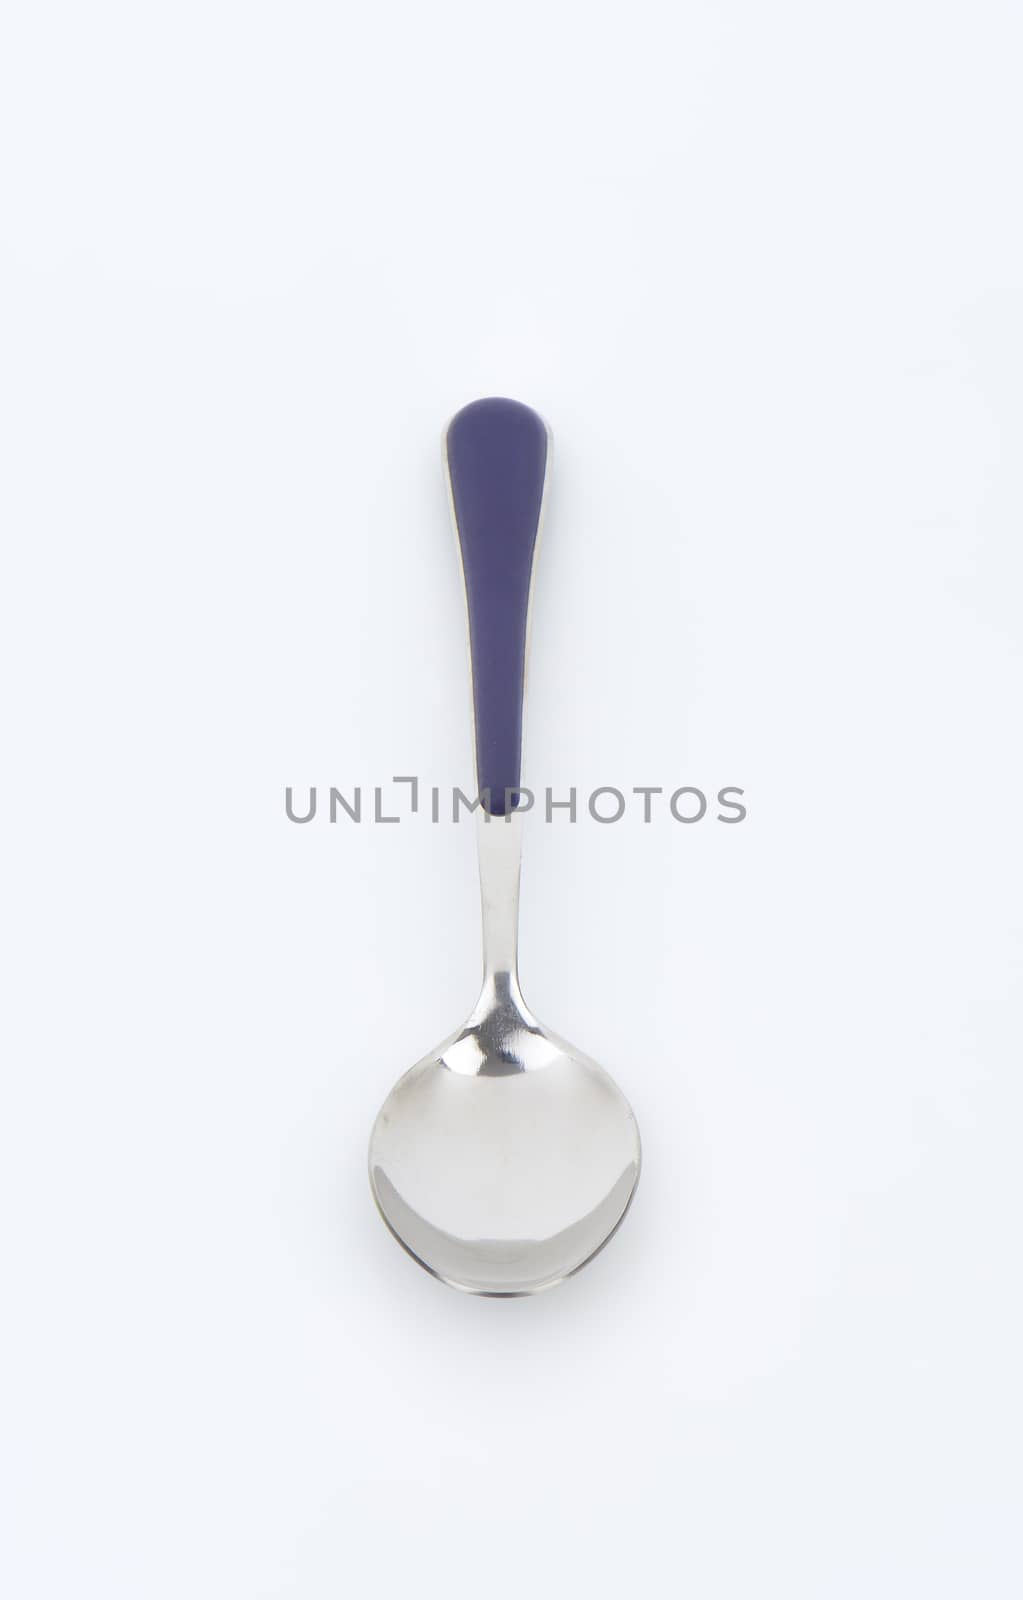 Small table spoon with blue handle